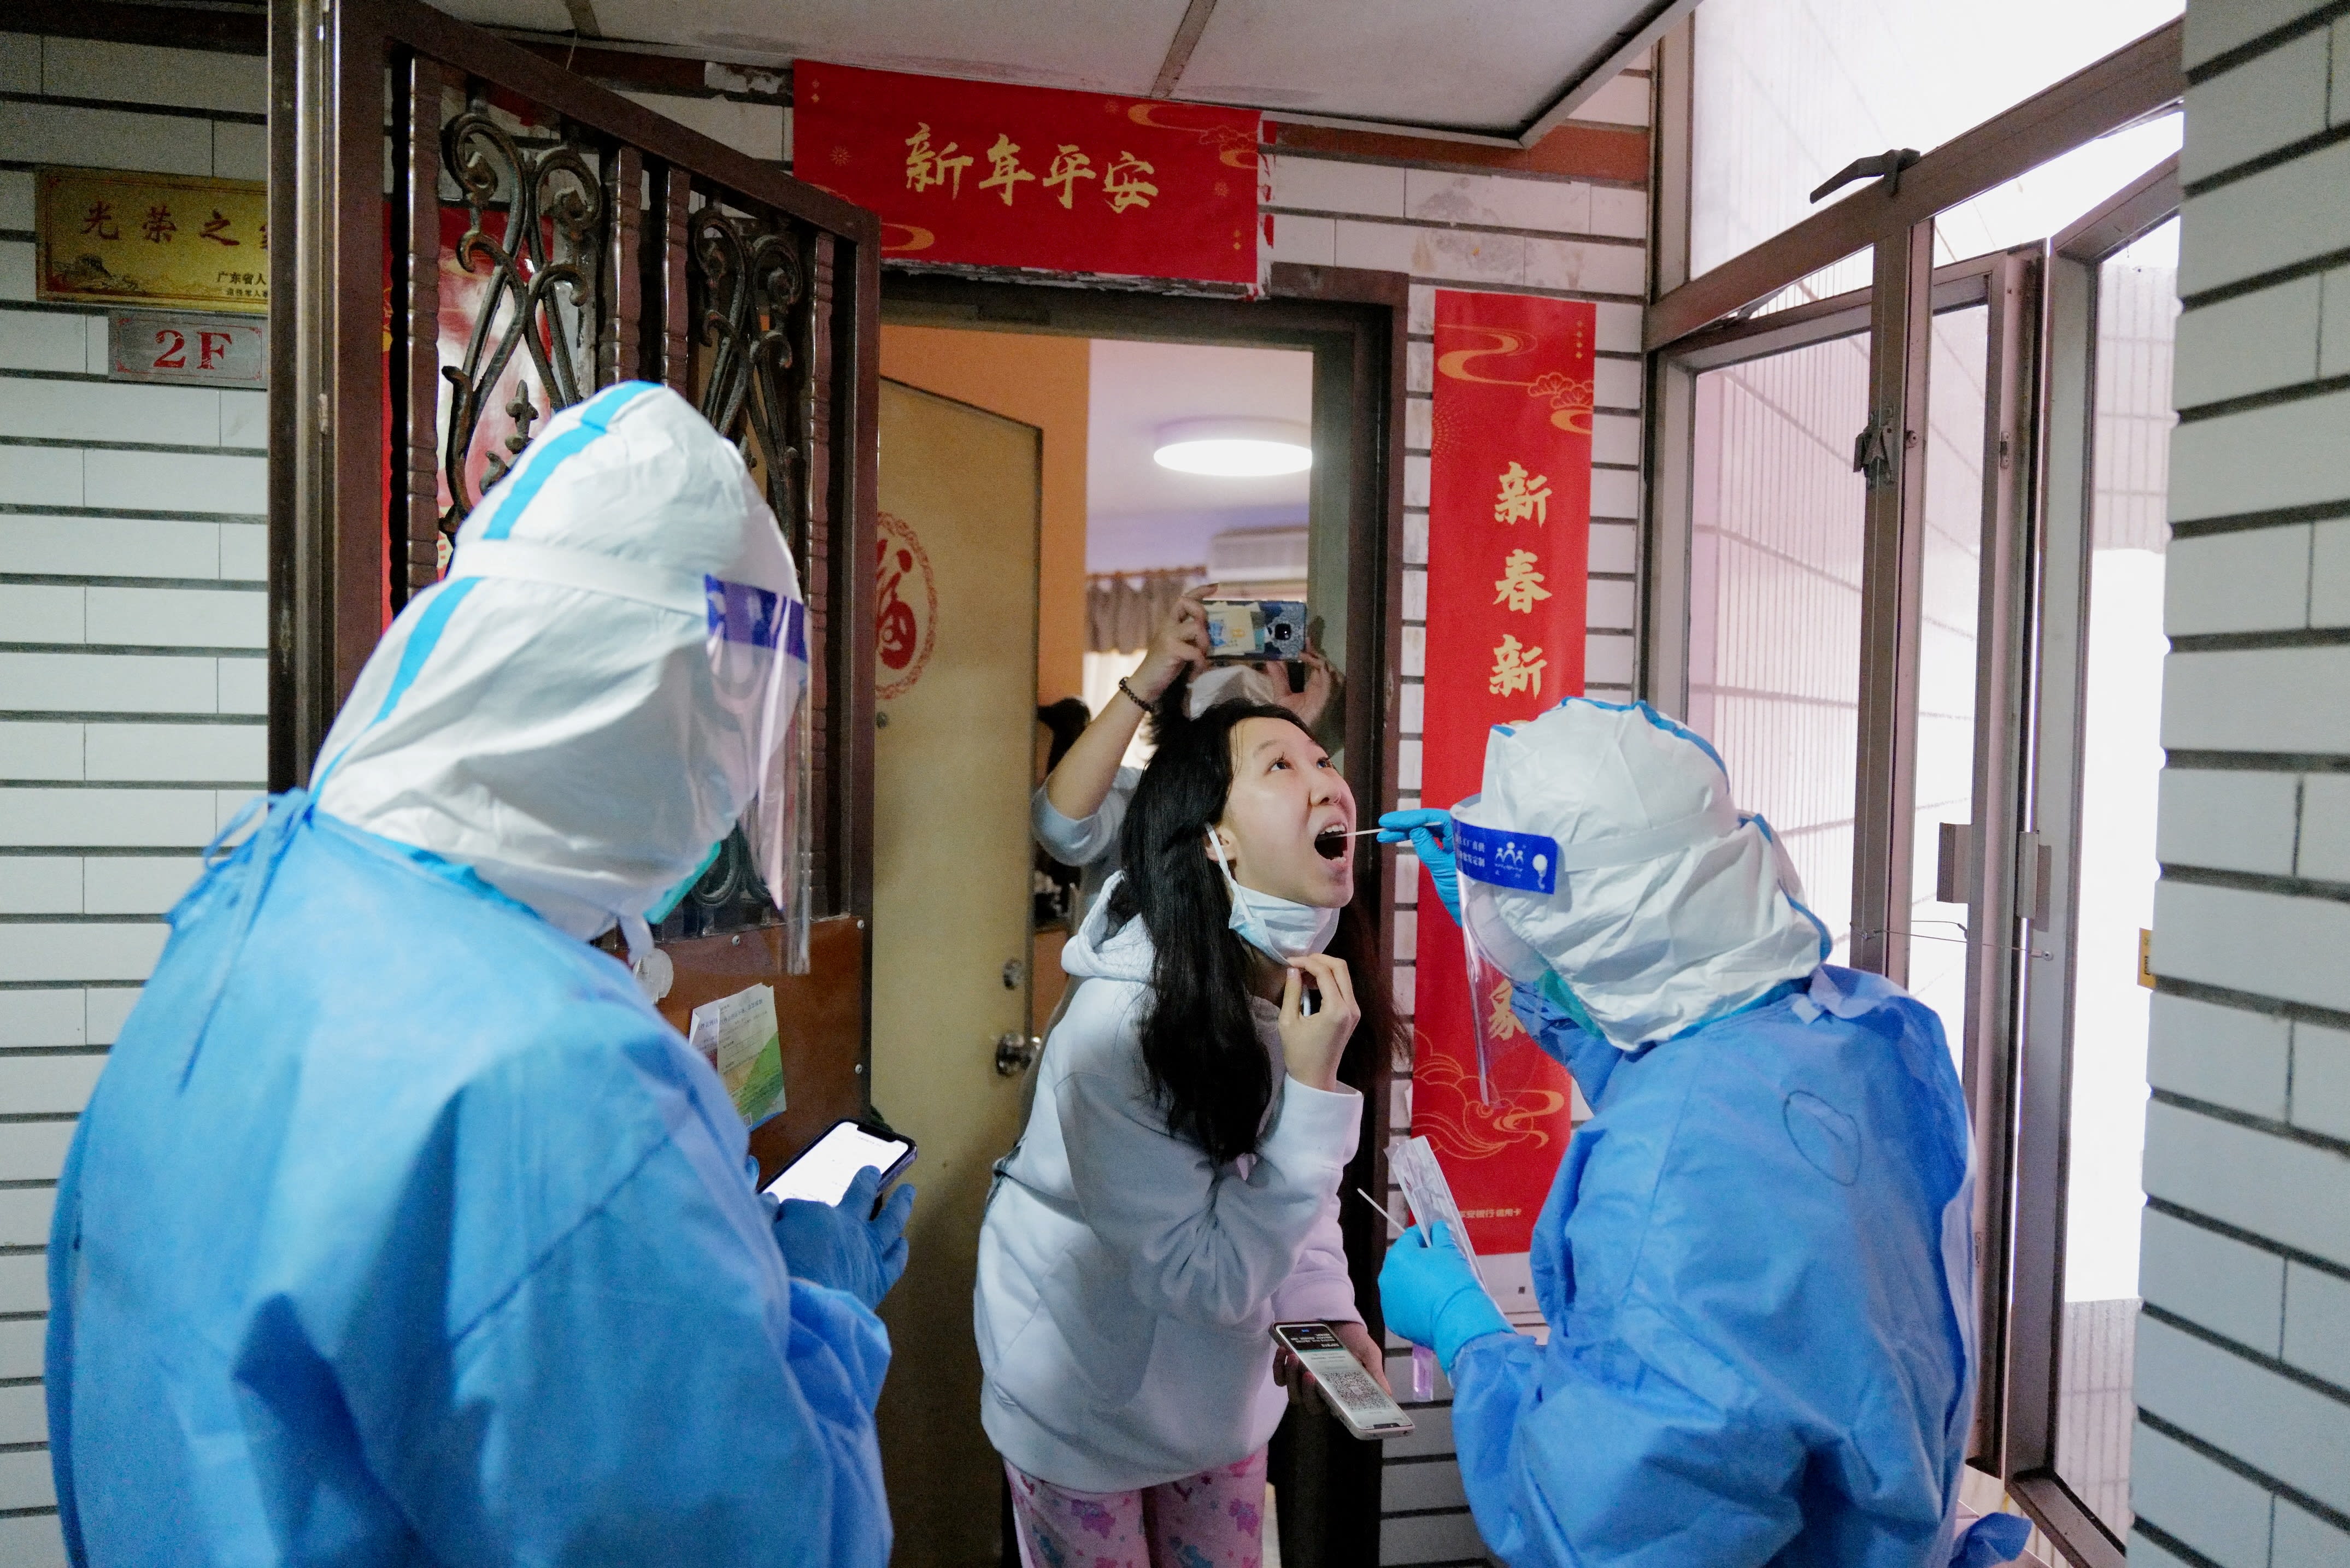 A worker in a protective suit collects a swab from a resident at a residential compound under lockdown, following the Covid-19 outbreak in Shenzhen, Guangdong province, China on March 14, 2022.
